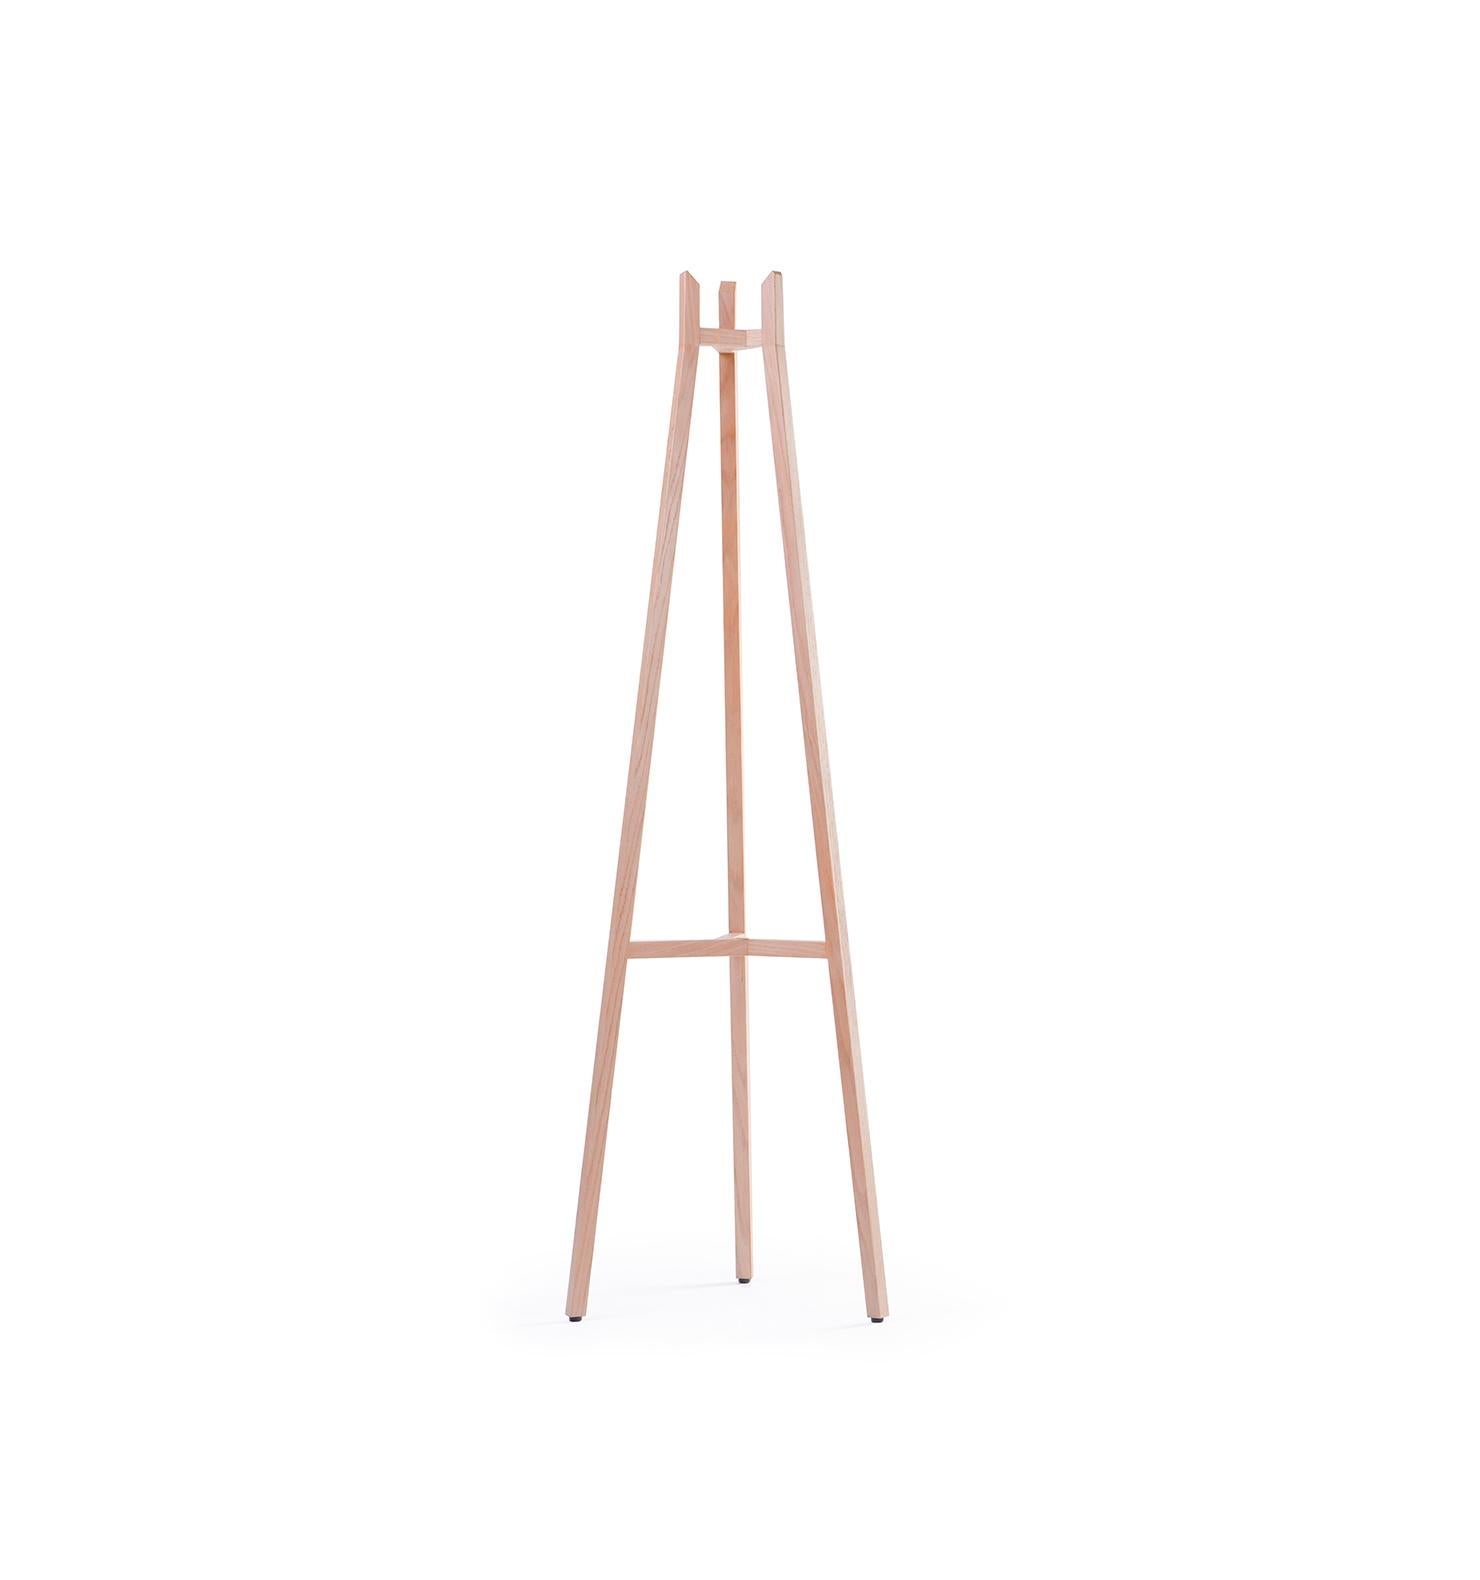 Introducing the Perchero DEDO, a Mexican contemporary coat stand designed by Emiliano Molina for CUCHARA. 

With its simple yet striking design, this stand is the perfect addition to any modern home. The set of angles and thin lines create a sleek